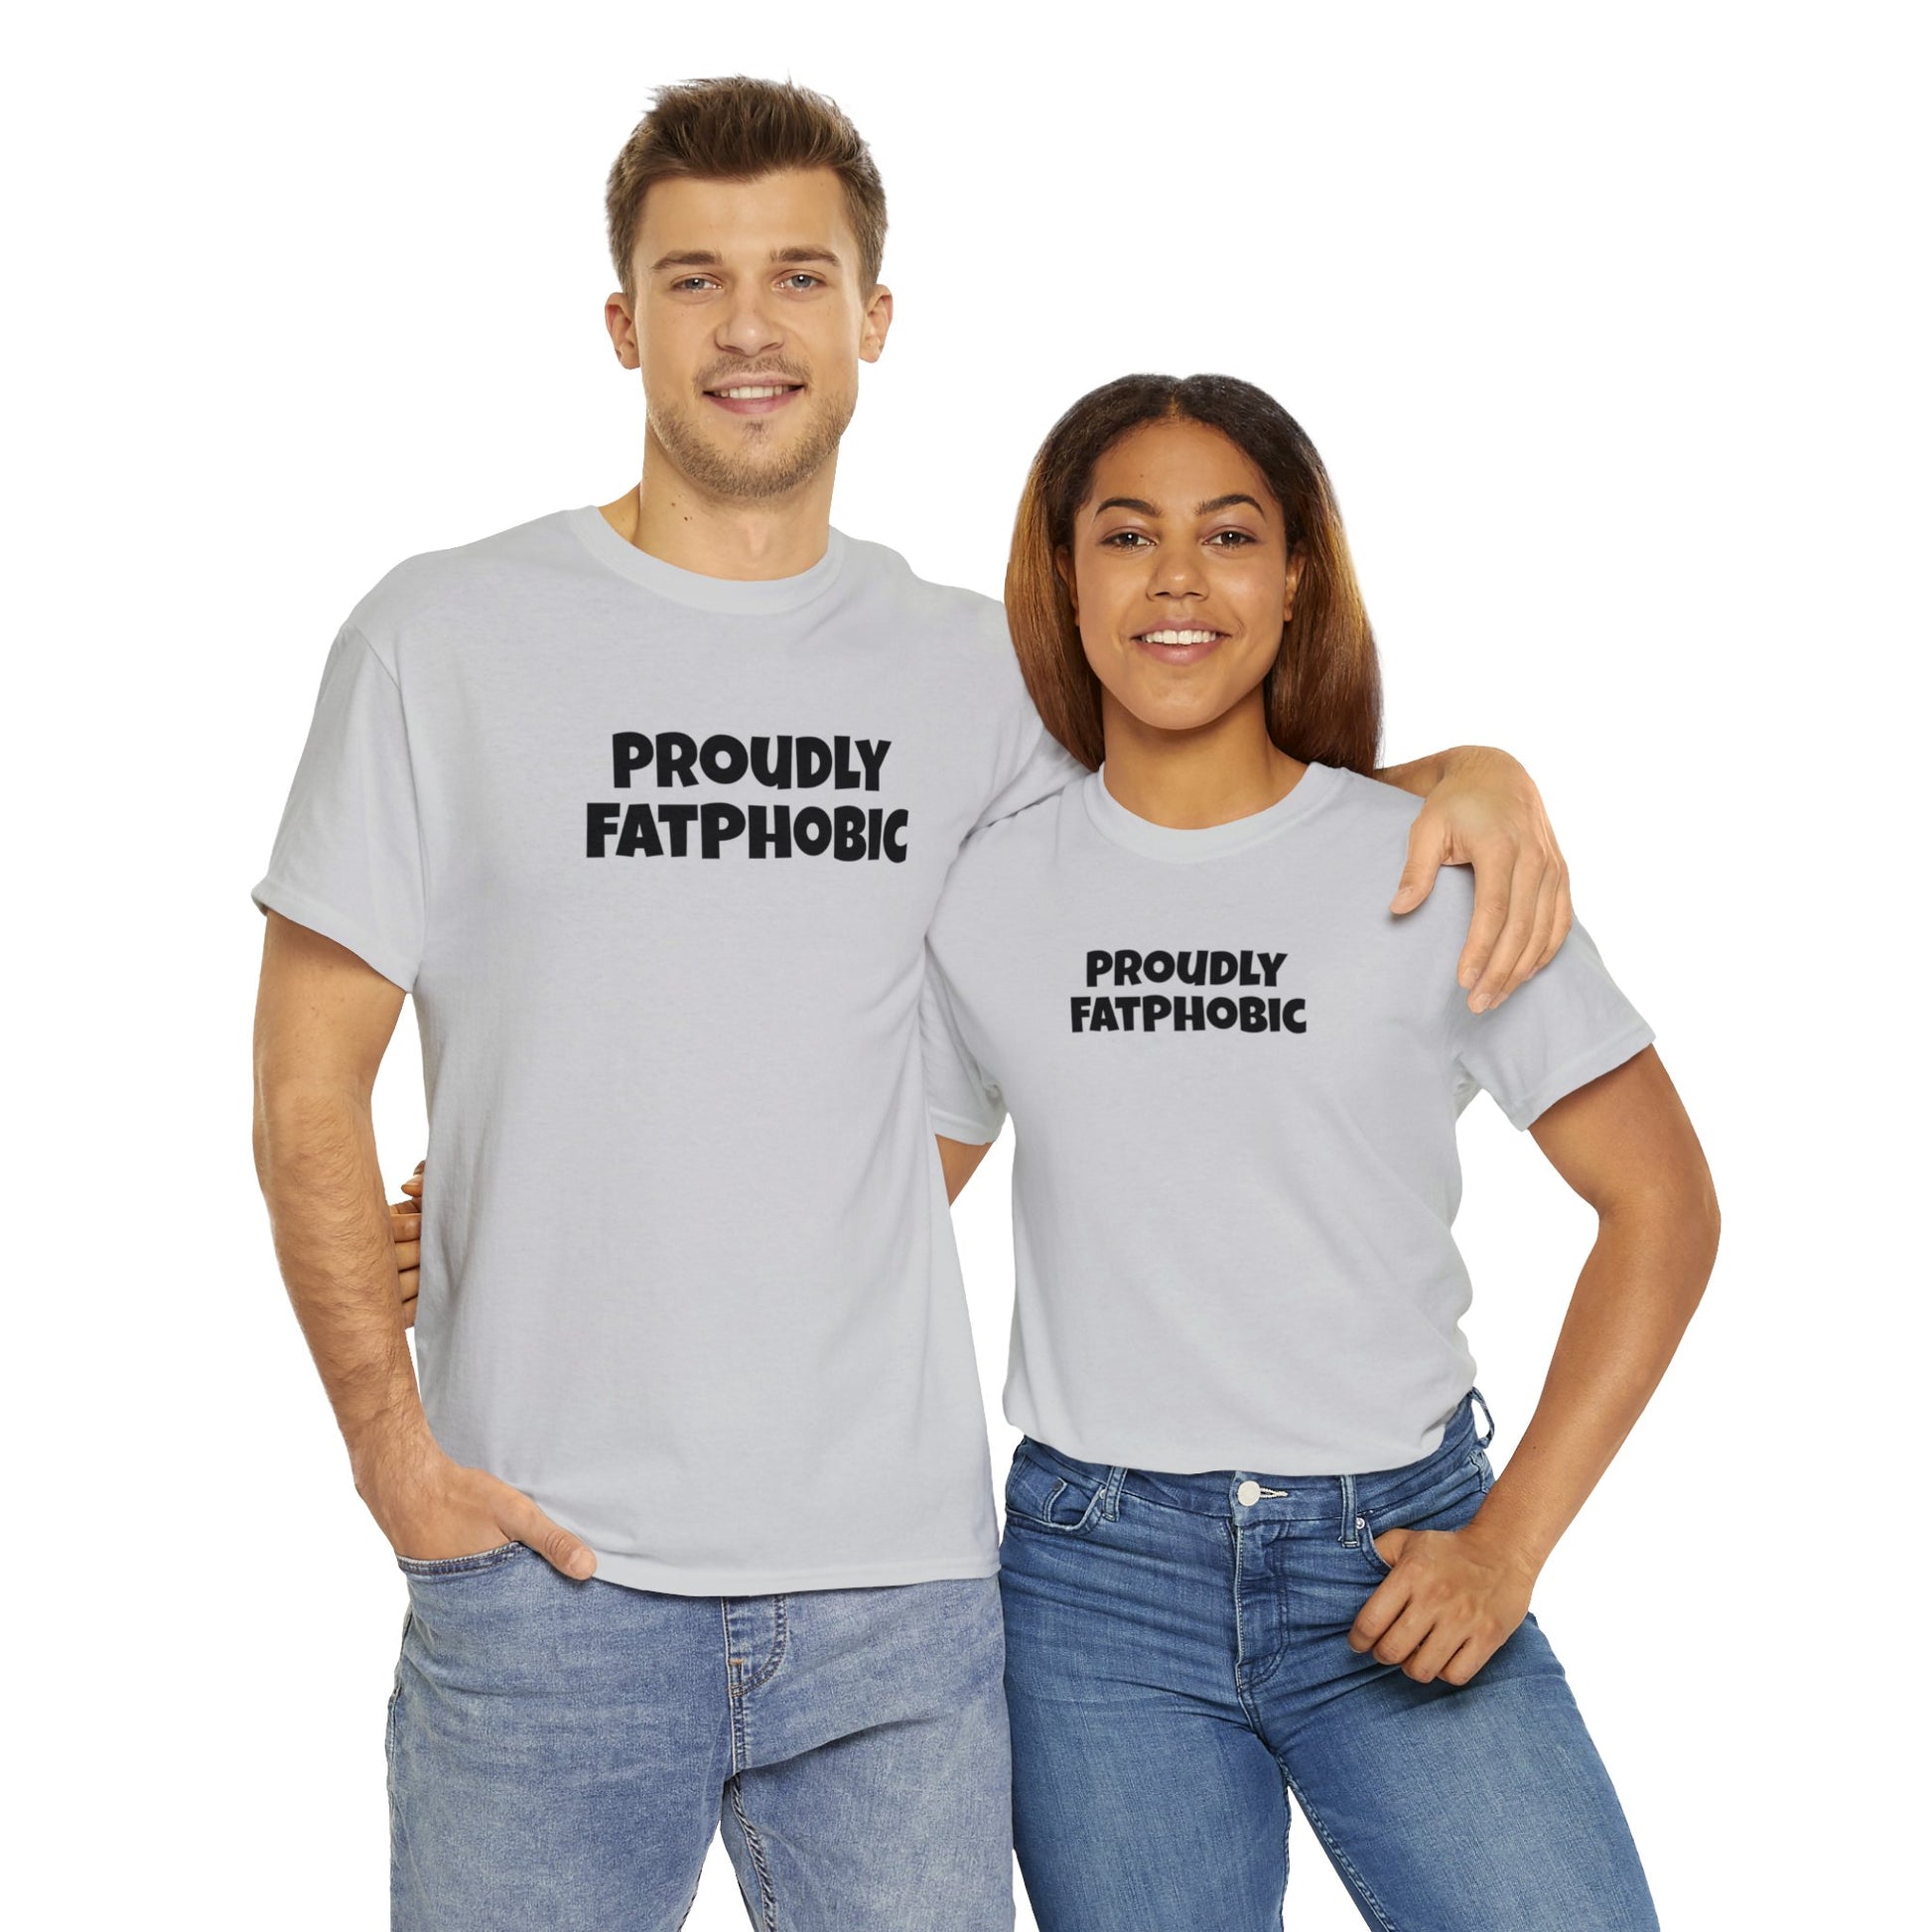 Proudly FatPhobic Tee